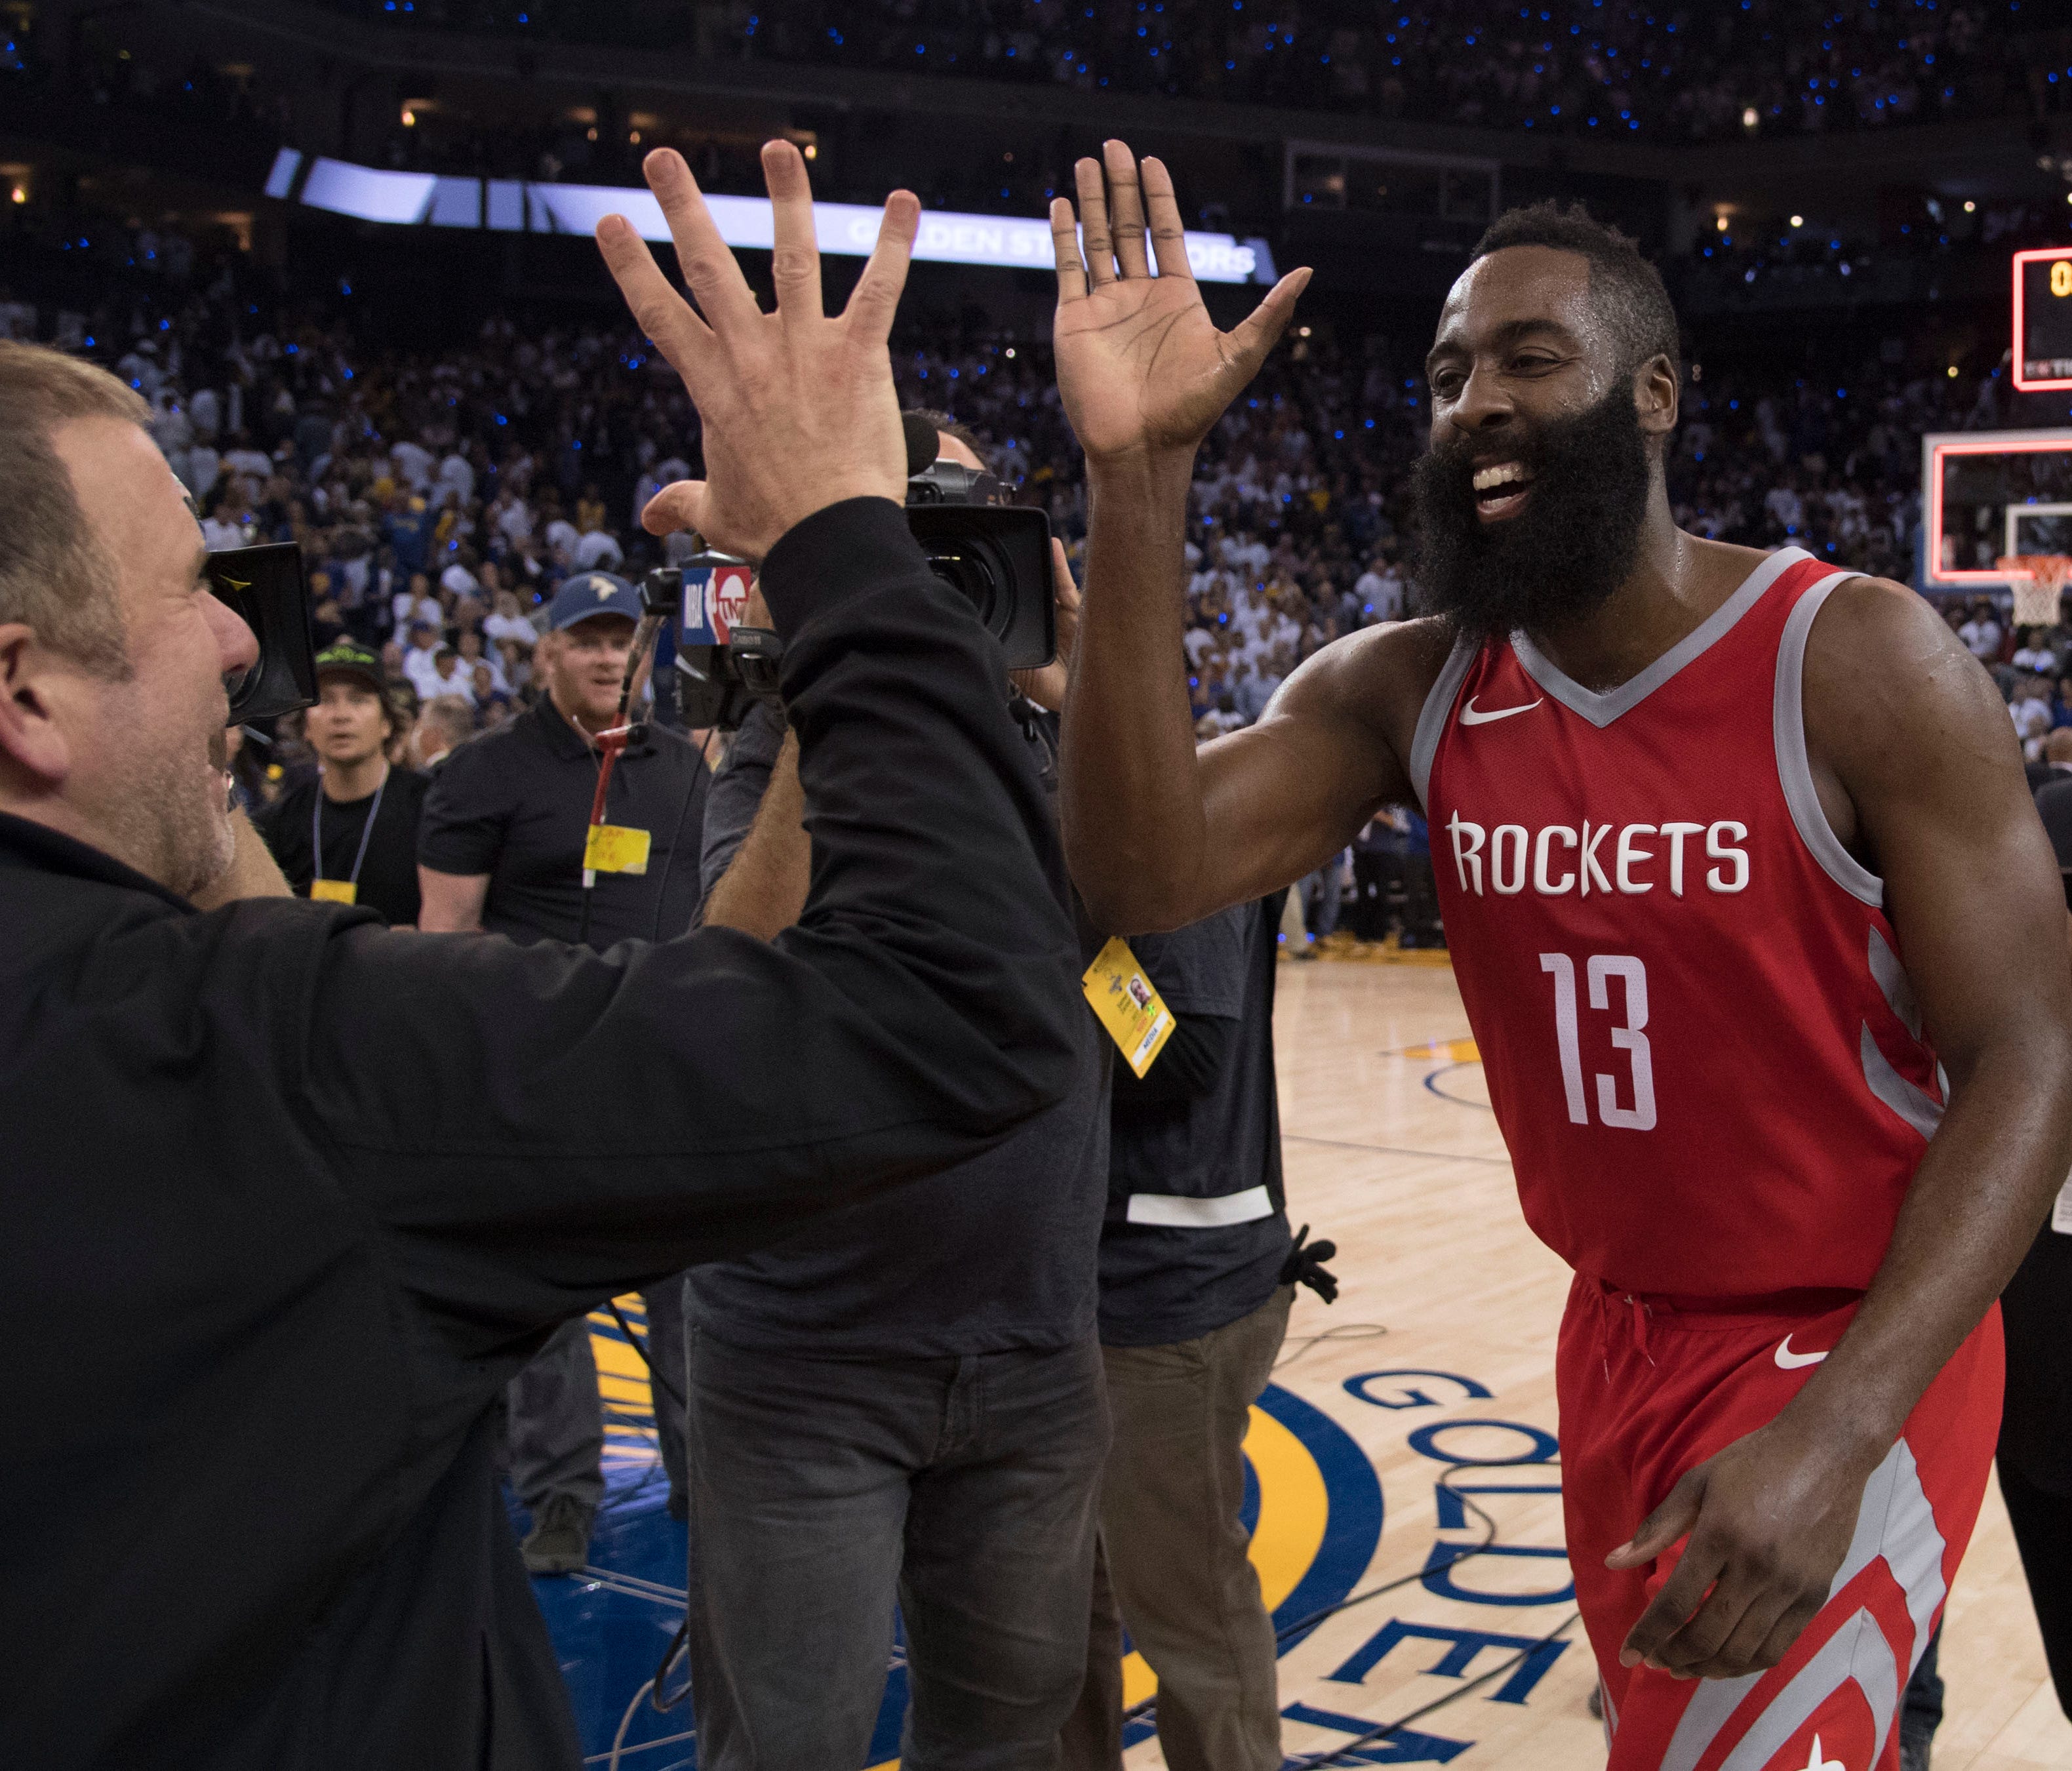 Houston Rockets owner Tilman Fertitta (left) celebrates with guard James Harden (13) after the game against the Golden State Warriors at Oracle Arena.